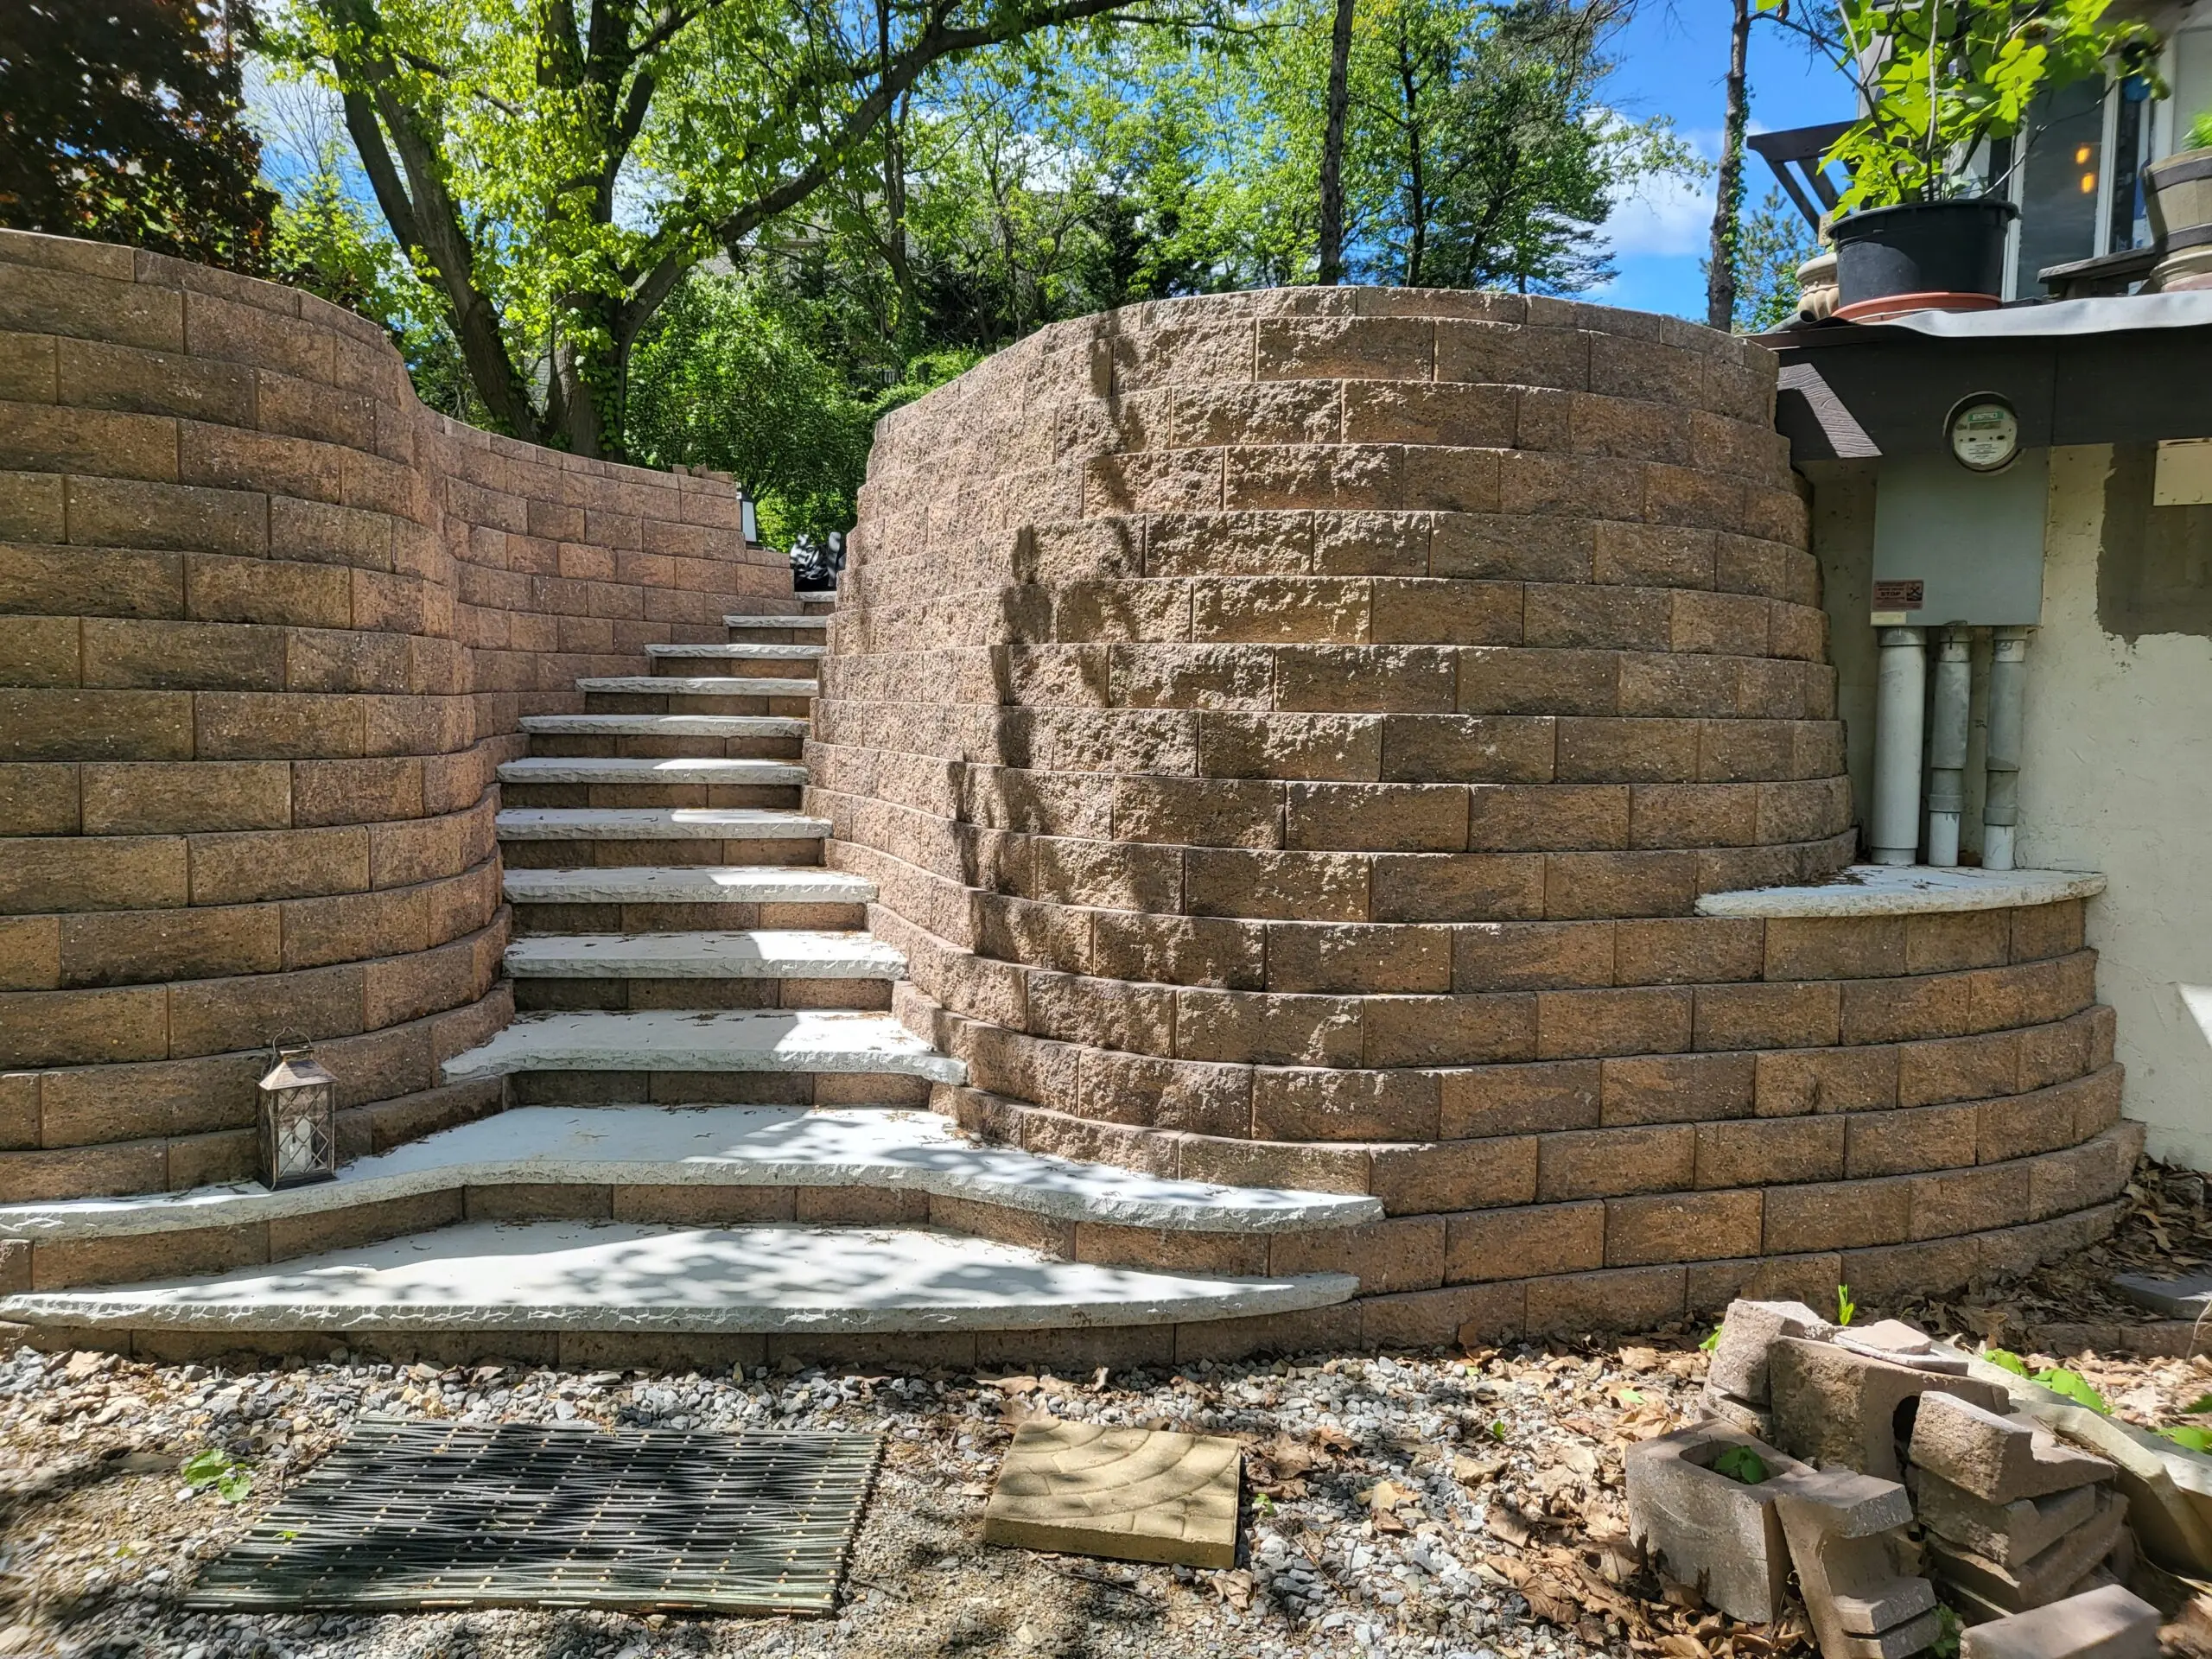 Unfinished retaining wall and steps leading to the patio extension, prior to staining